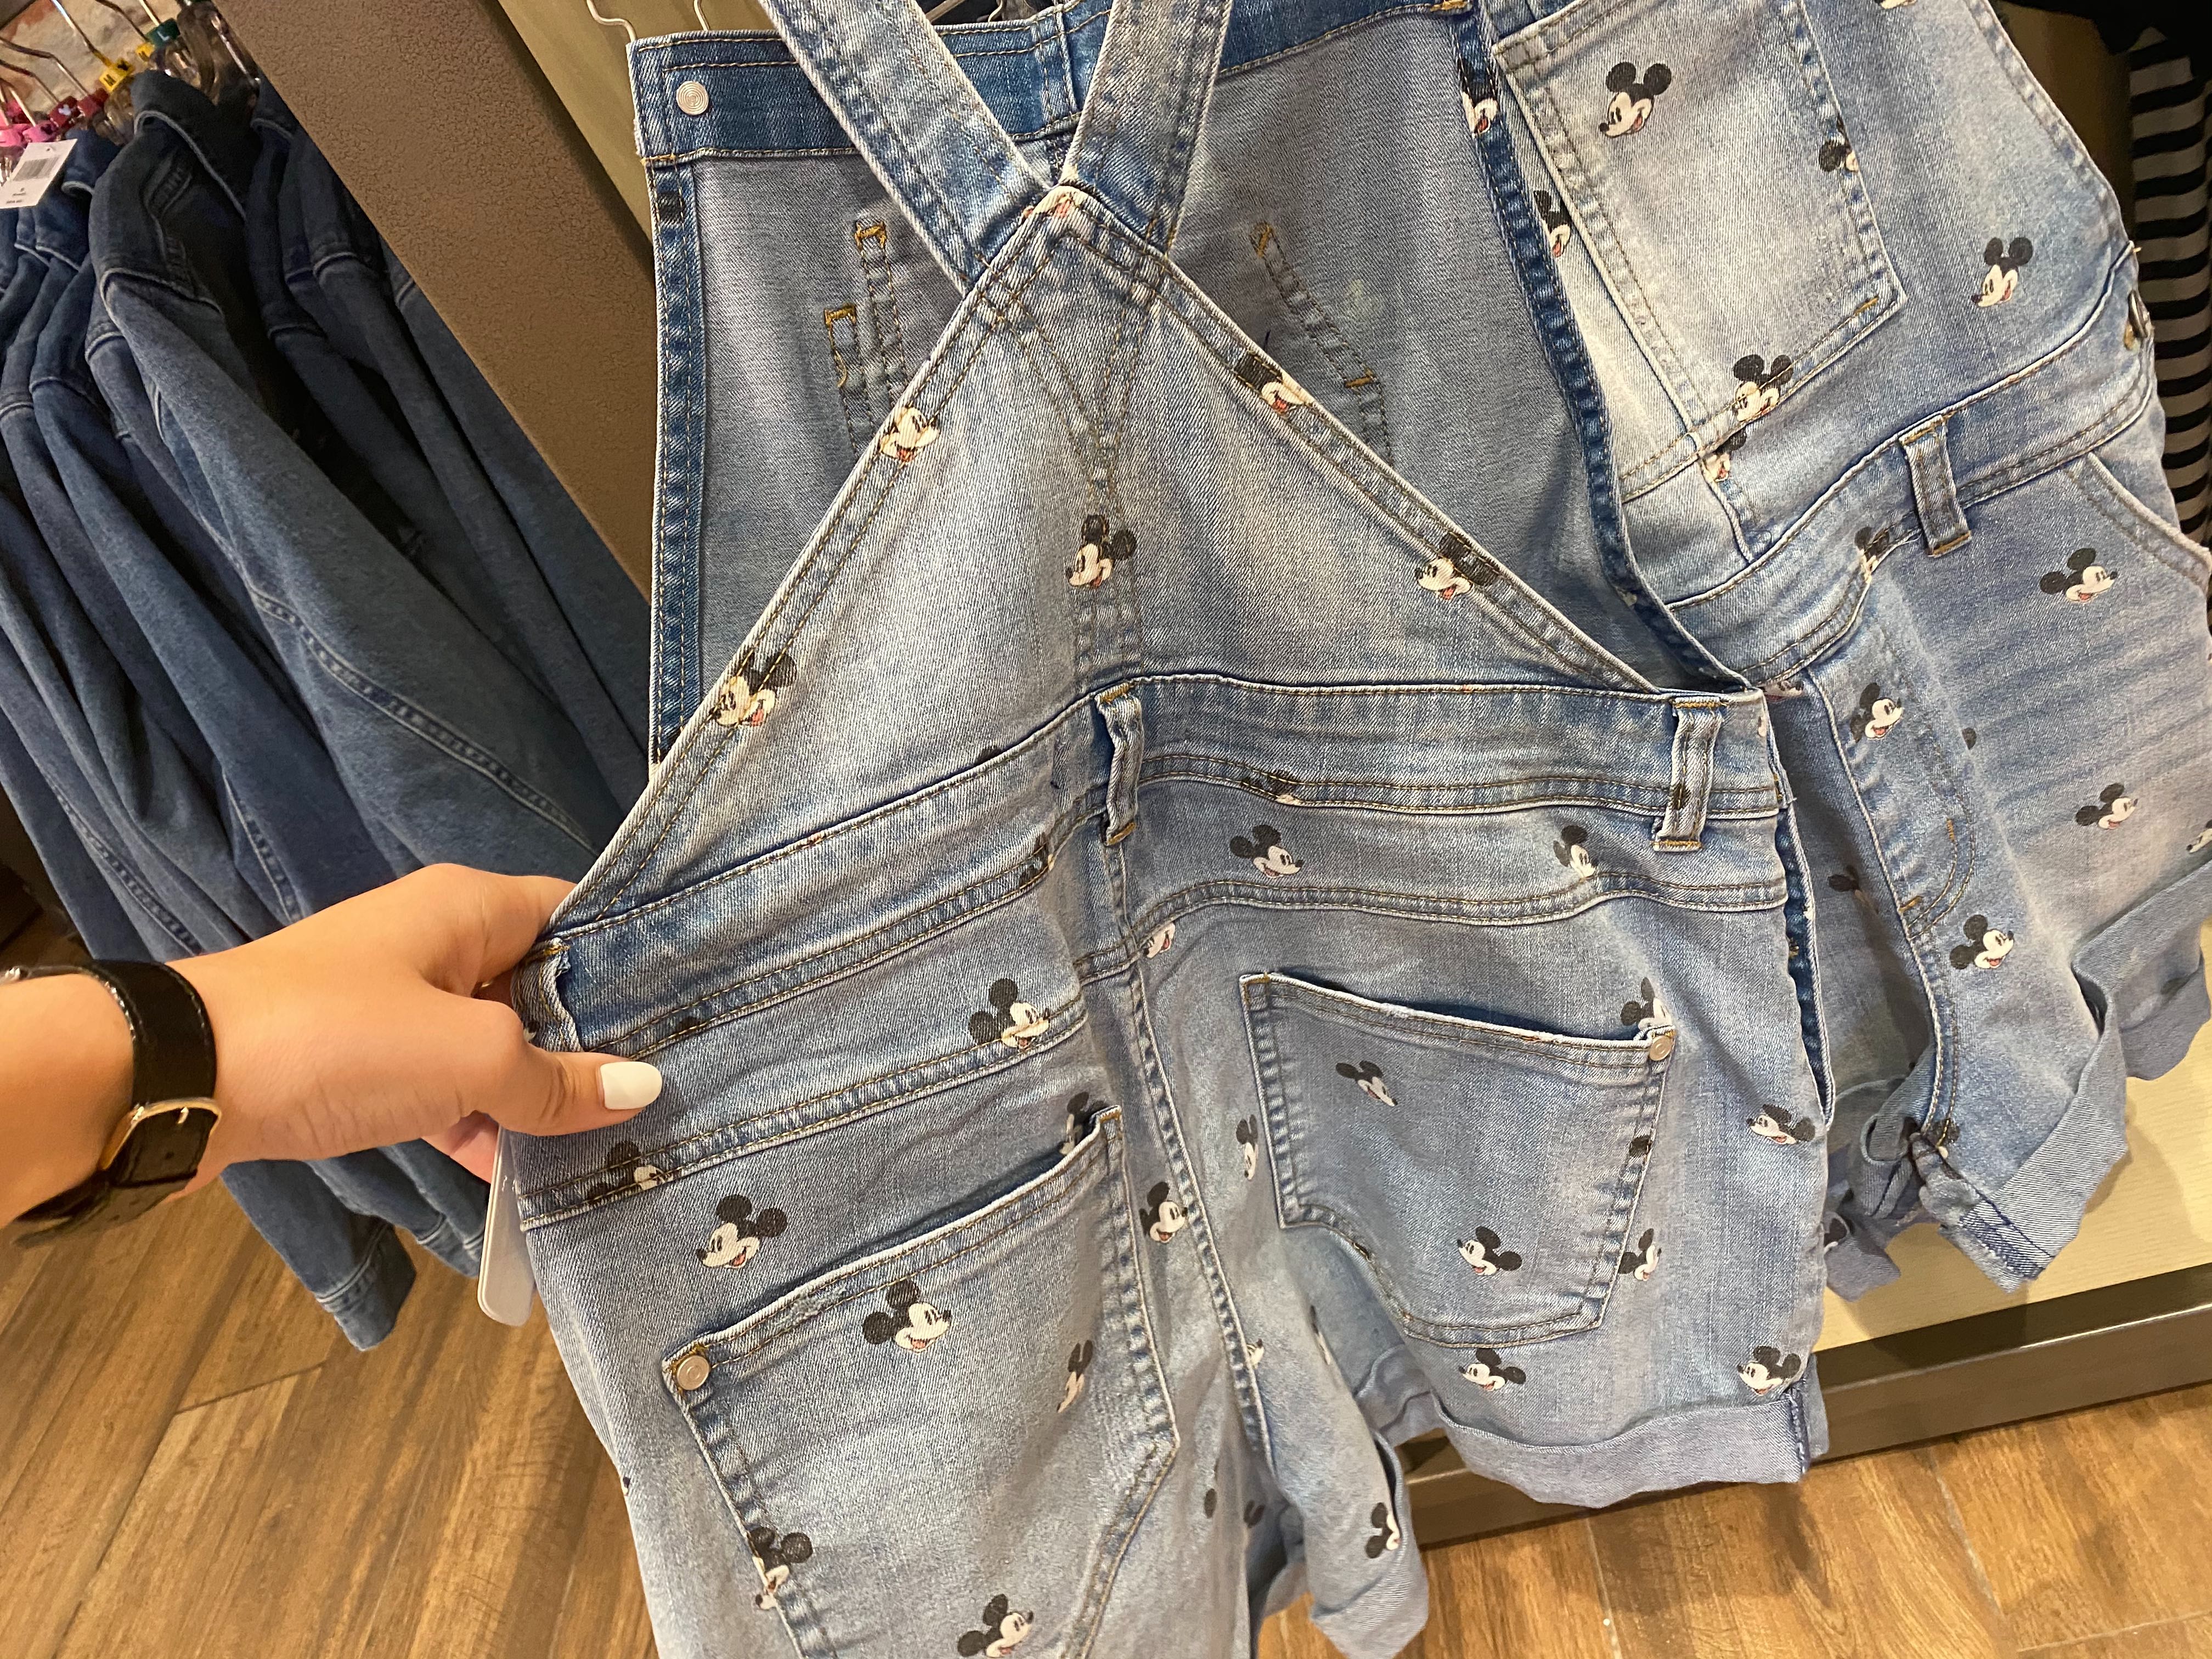 PHOTOS: New Mickey Mouse Denim Jeans, Overalls and Shorts Released at ...